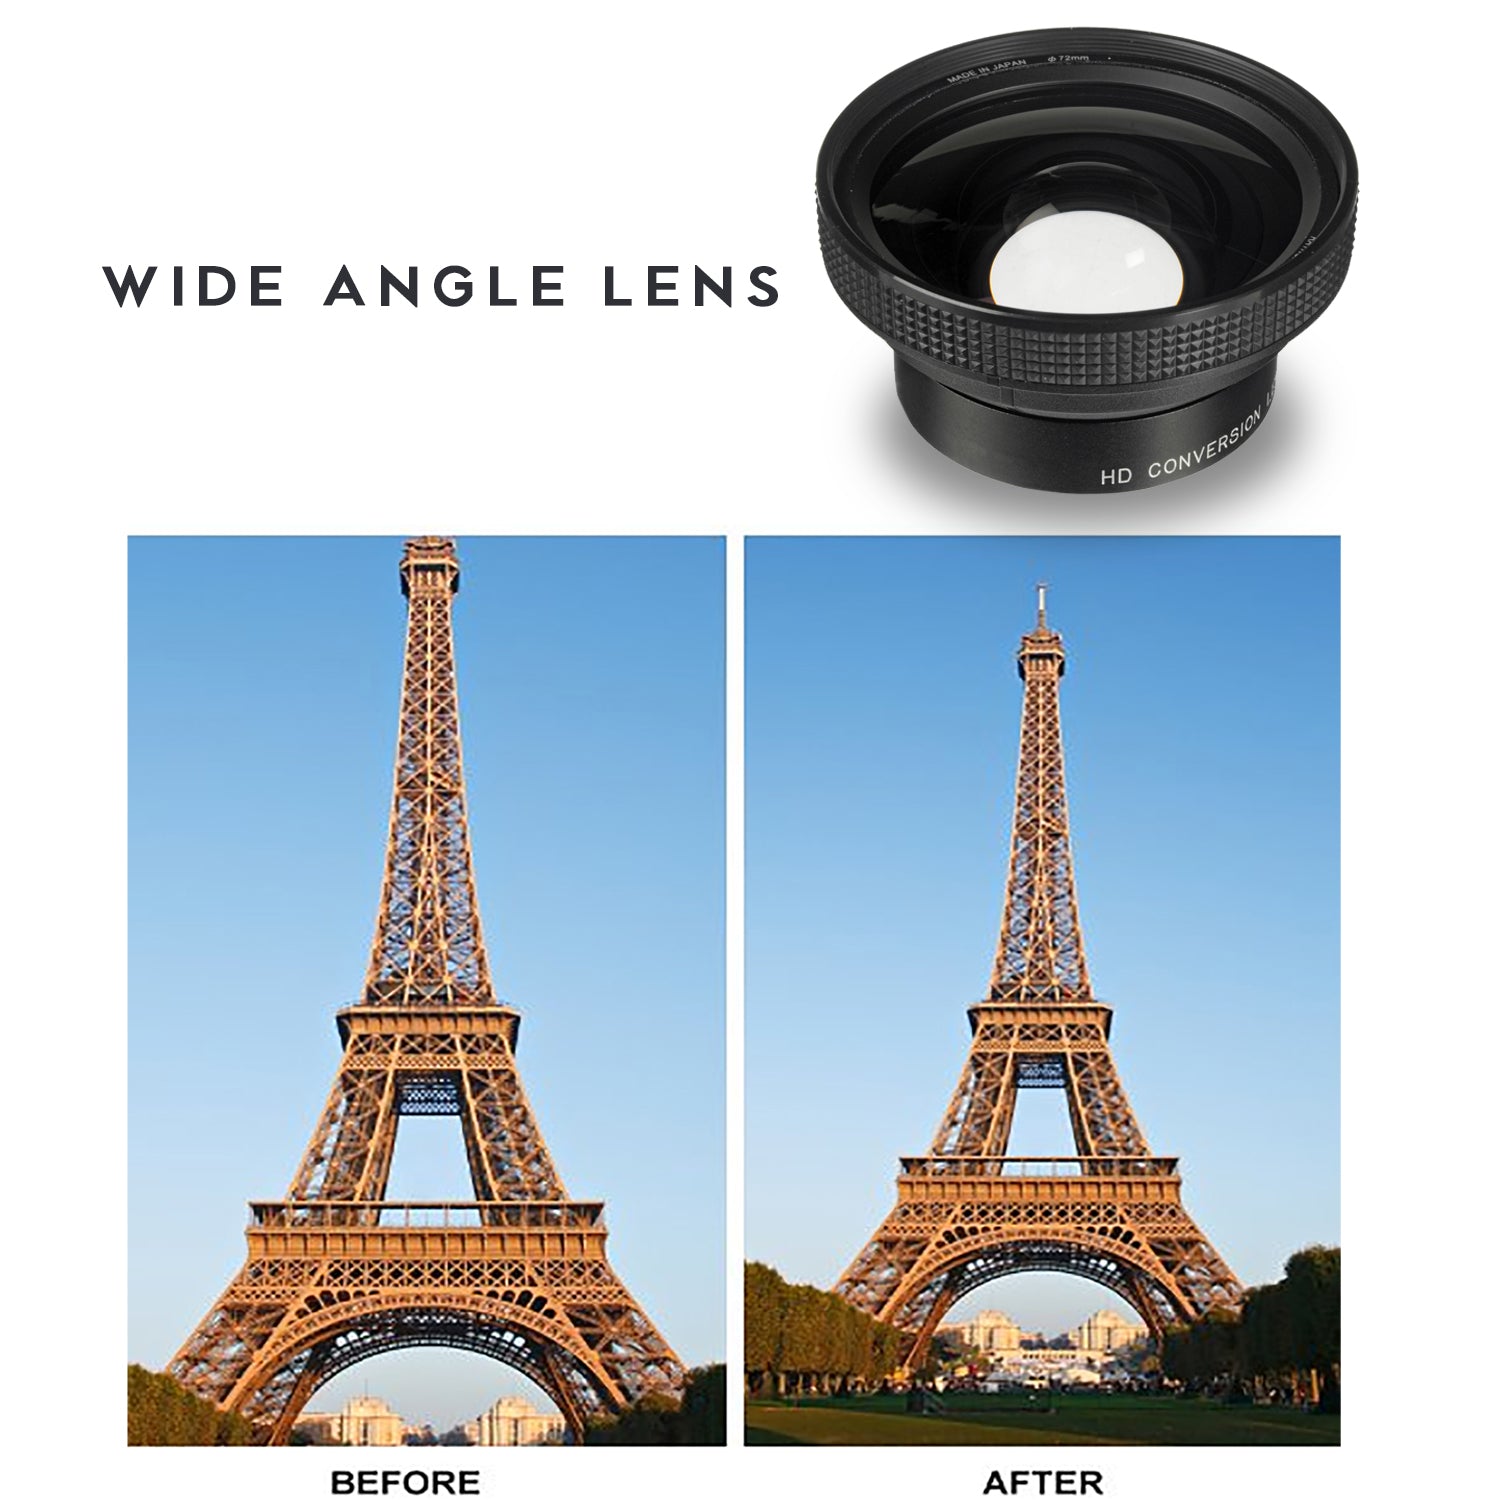 37mm Accessory Bundle with Wide Angle and Telephoto Lens, Hand Strap, and More